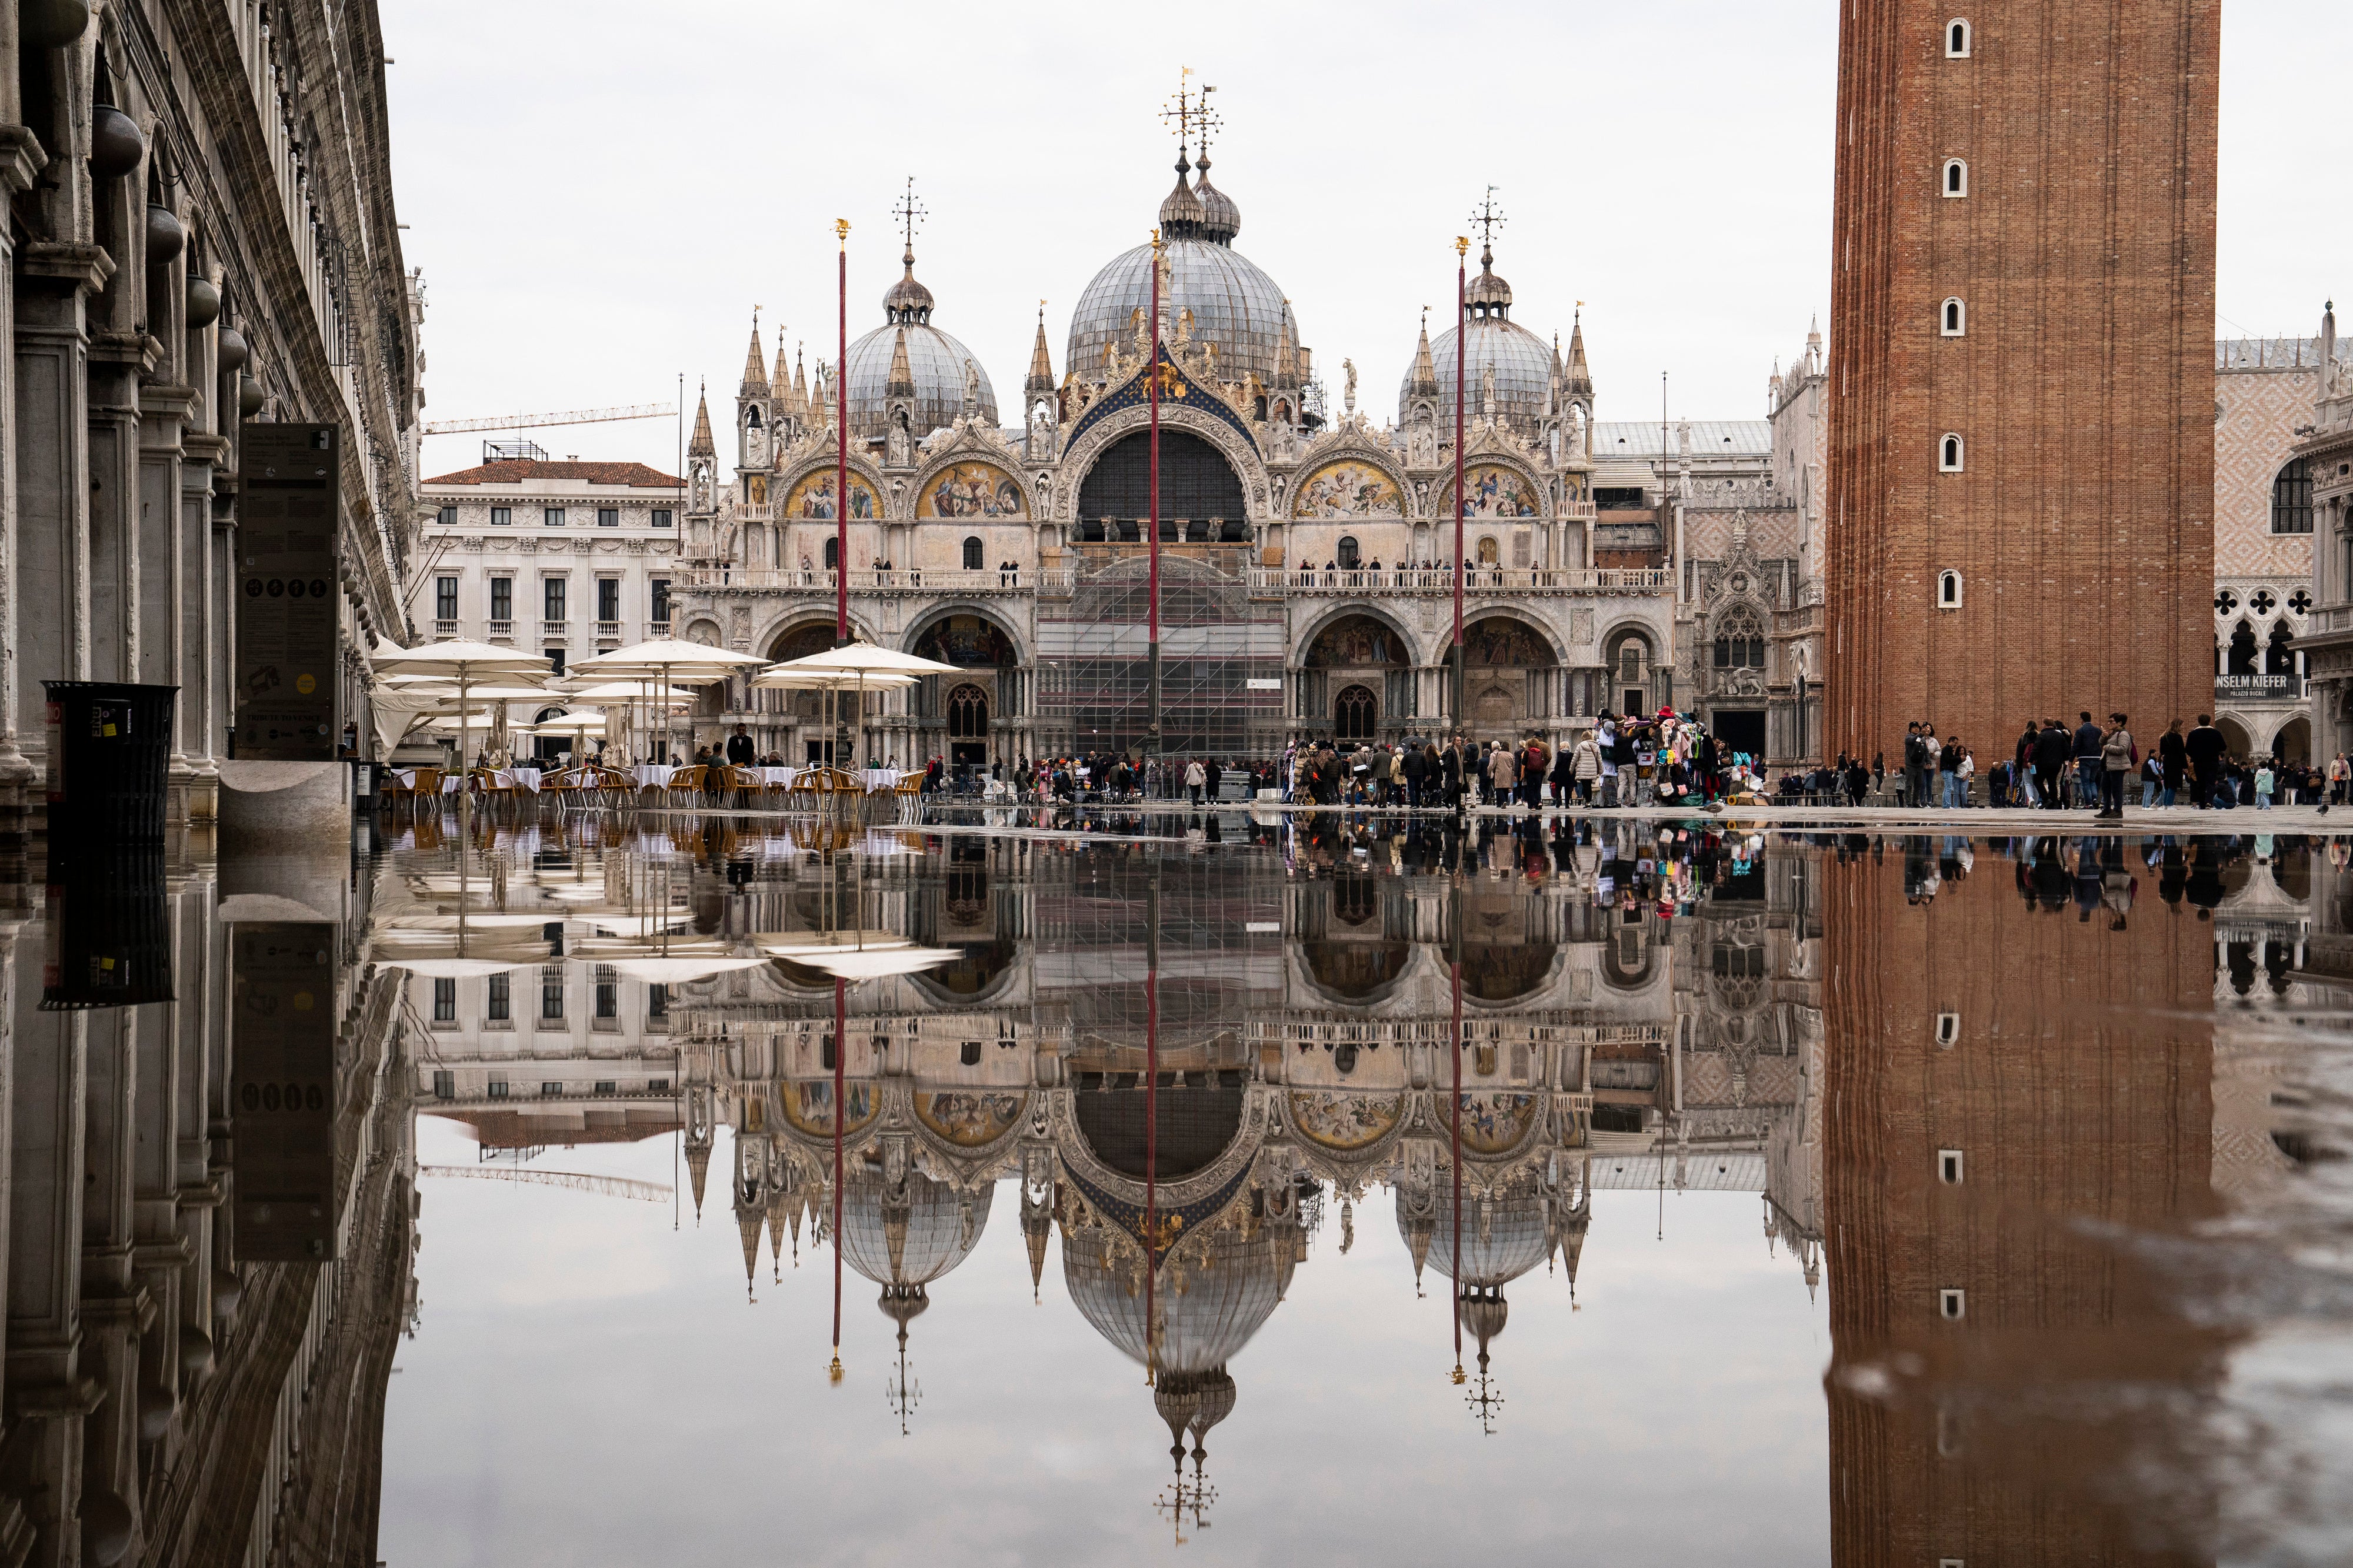 Piazza San Marco floods some 100 days per year. Though a barrier system is raised to prevent more extreme events